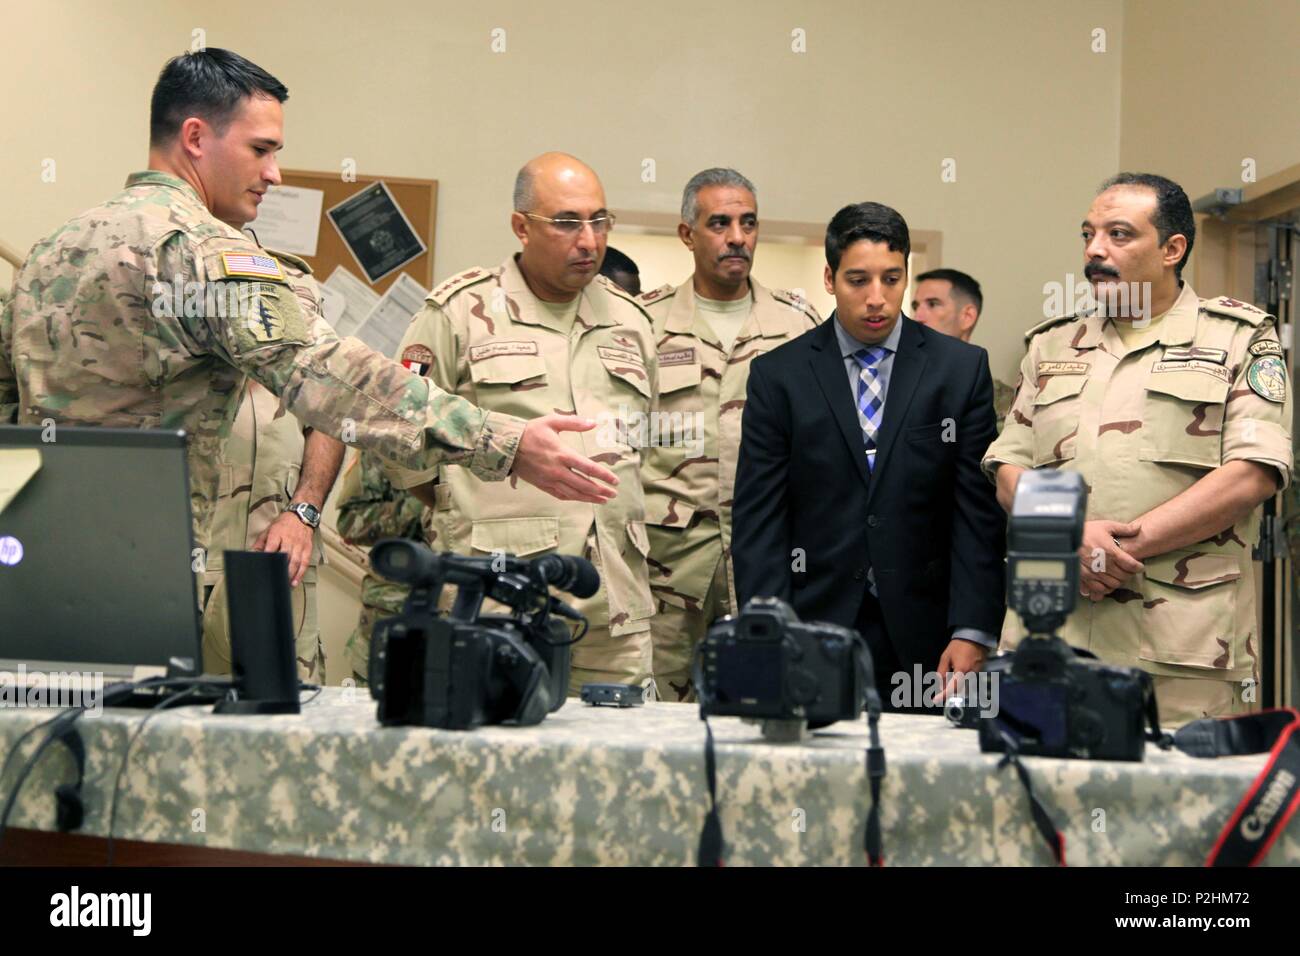 A 4th Military Information Support Group Soldier briefs Brig. Gen. Khalil Essam Mohamed Elsayed (second from left), commander, Egyptian Human Development and Behavioral Sciences Center, on the equipment and capabilities of the Group’s audio/video teams during a visit to Fort Bragg, Sept. 24-28. Elsayed and three other Egyptian army officers traveled here to exchange information in order to coordinate training programs and synchronize efforts with U.S. partners. Stock Photo